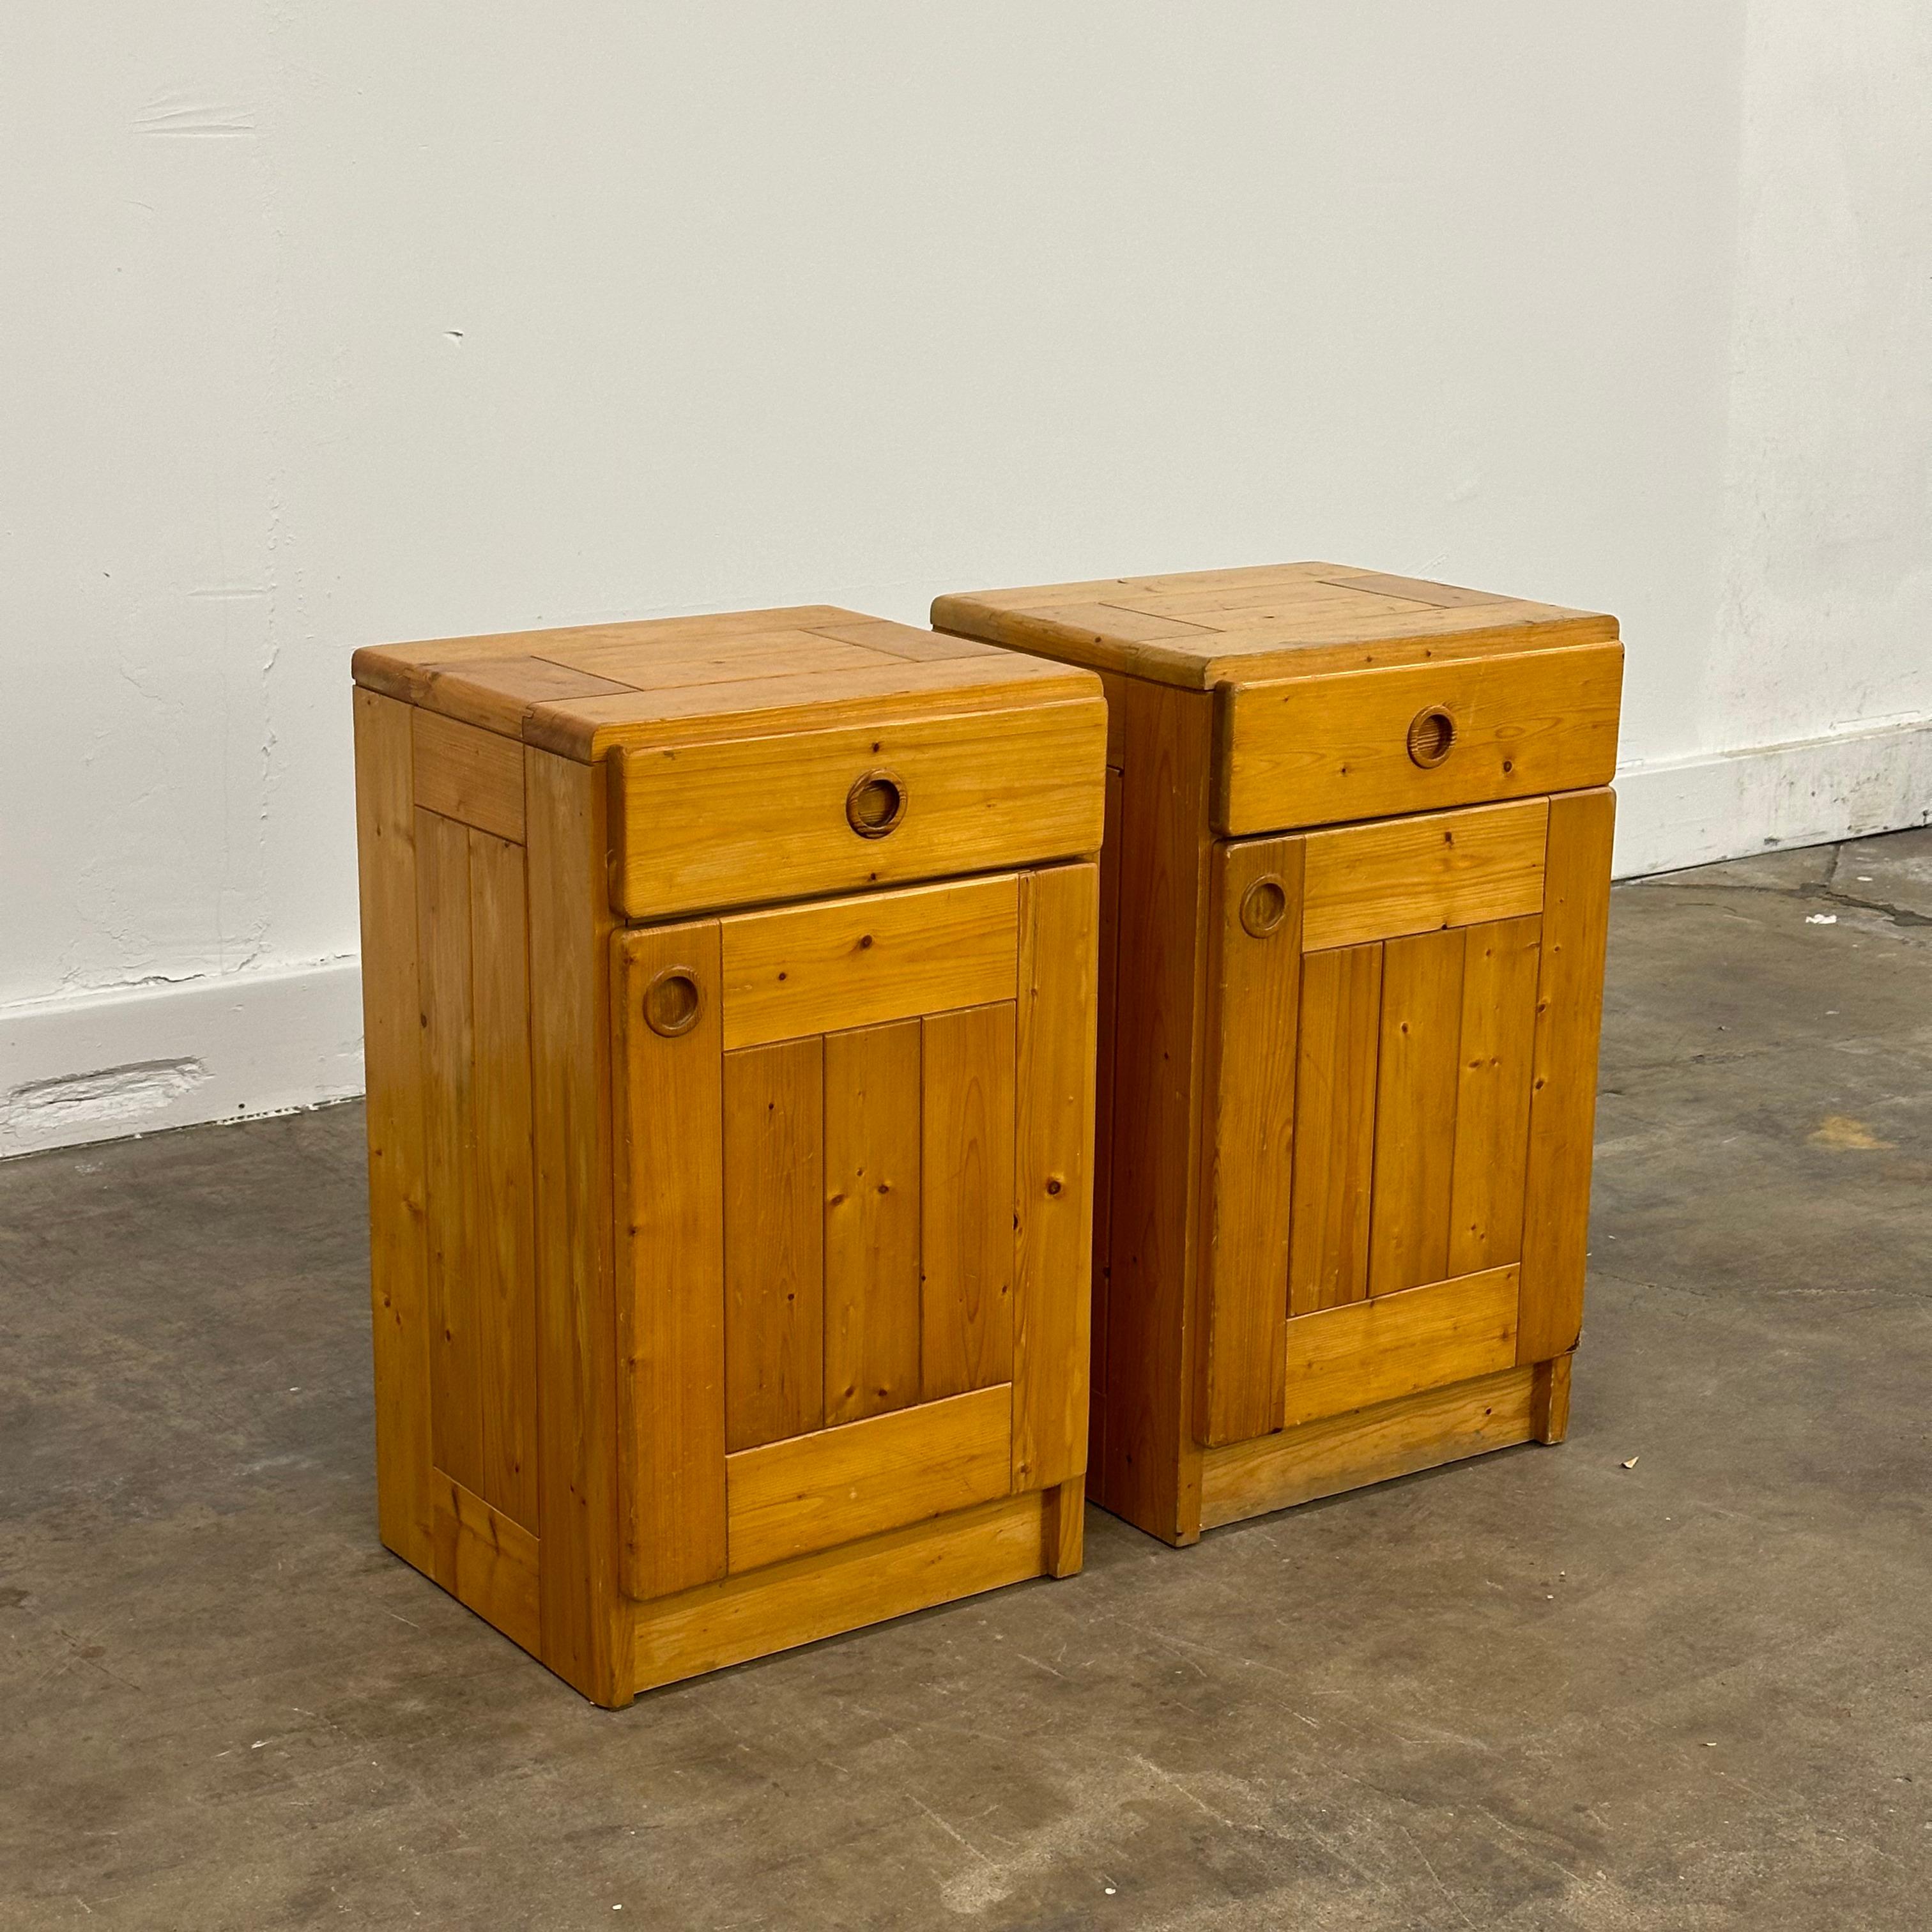 Charlotte Perriand storage pair of storage cabinets for Les Arcs, France, 1960s. One pull out drawer with storage beneath, collectible design from the popular French ski resort.